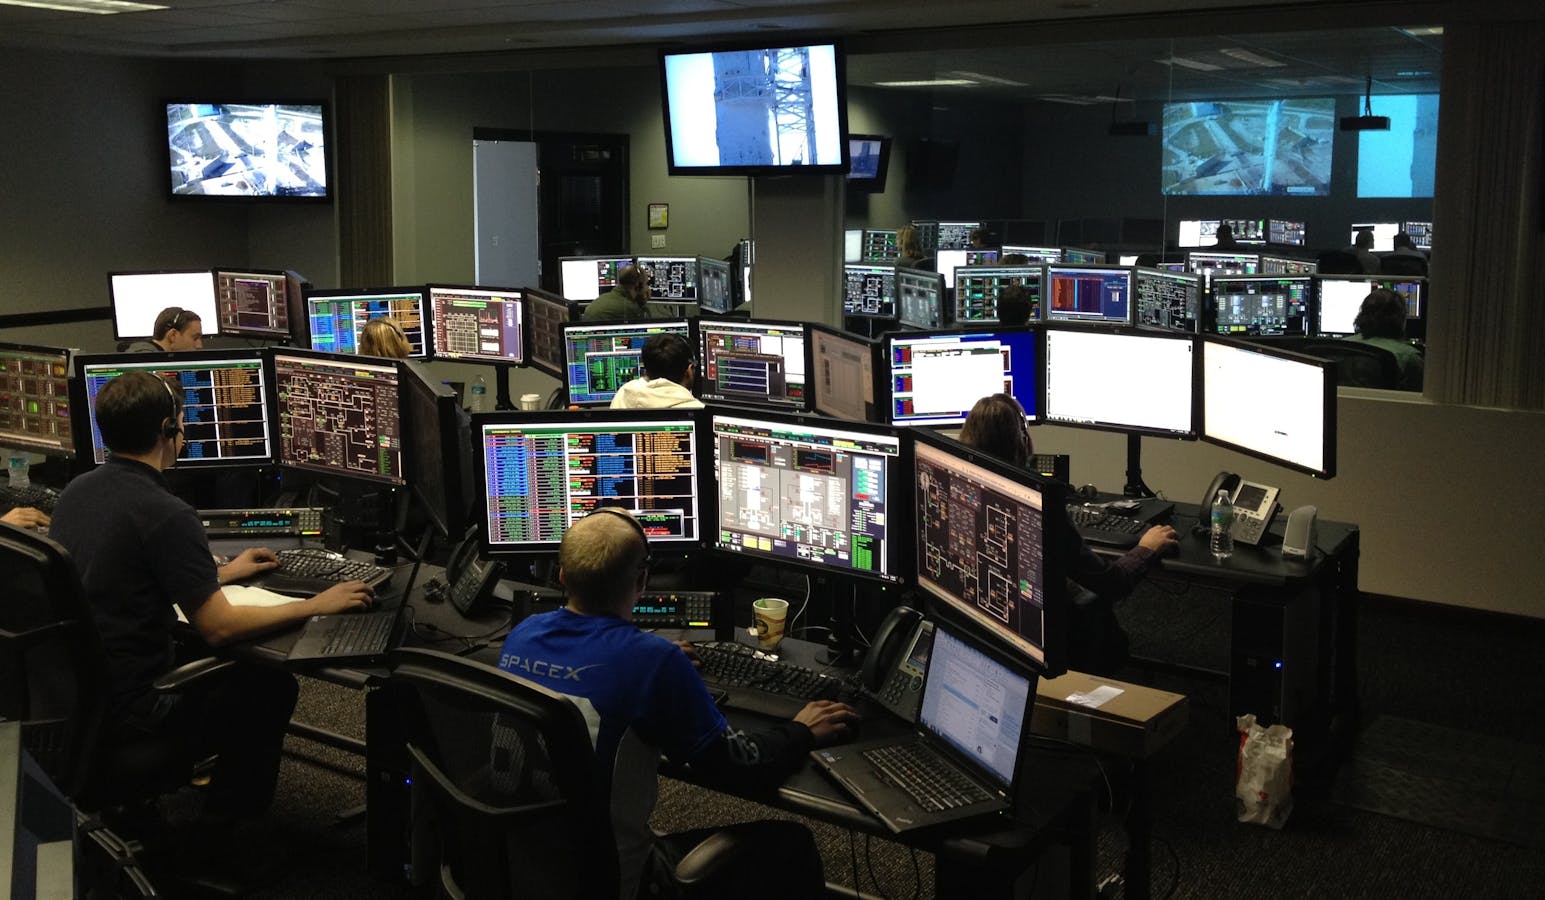 A busy control room with many people and computers.